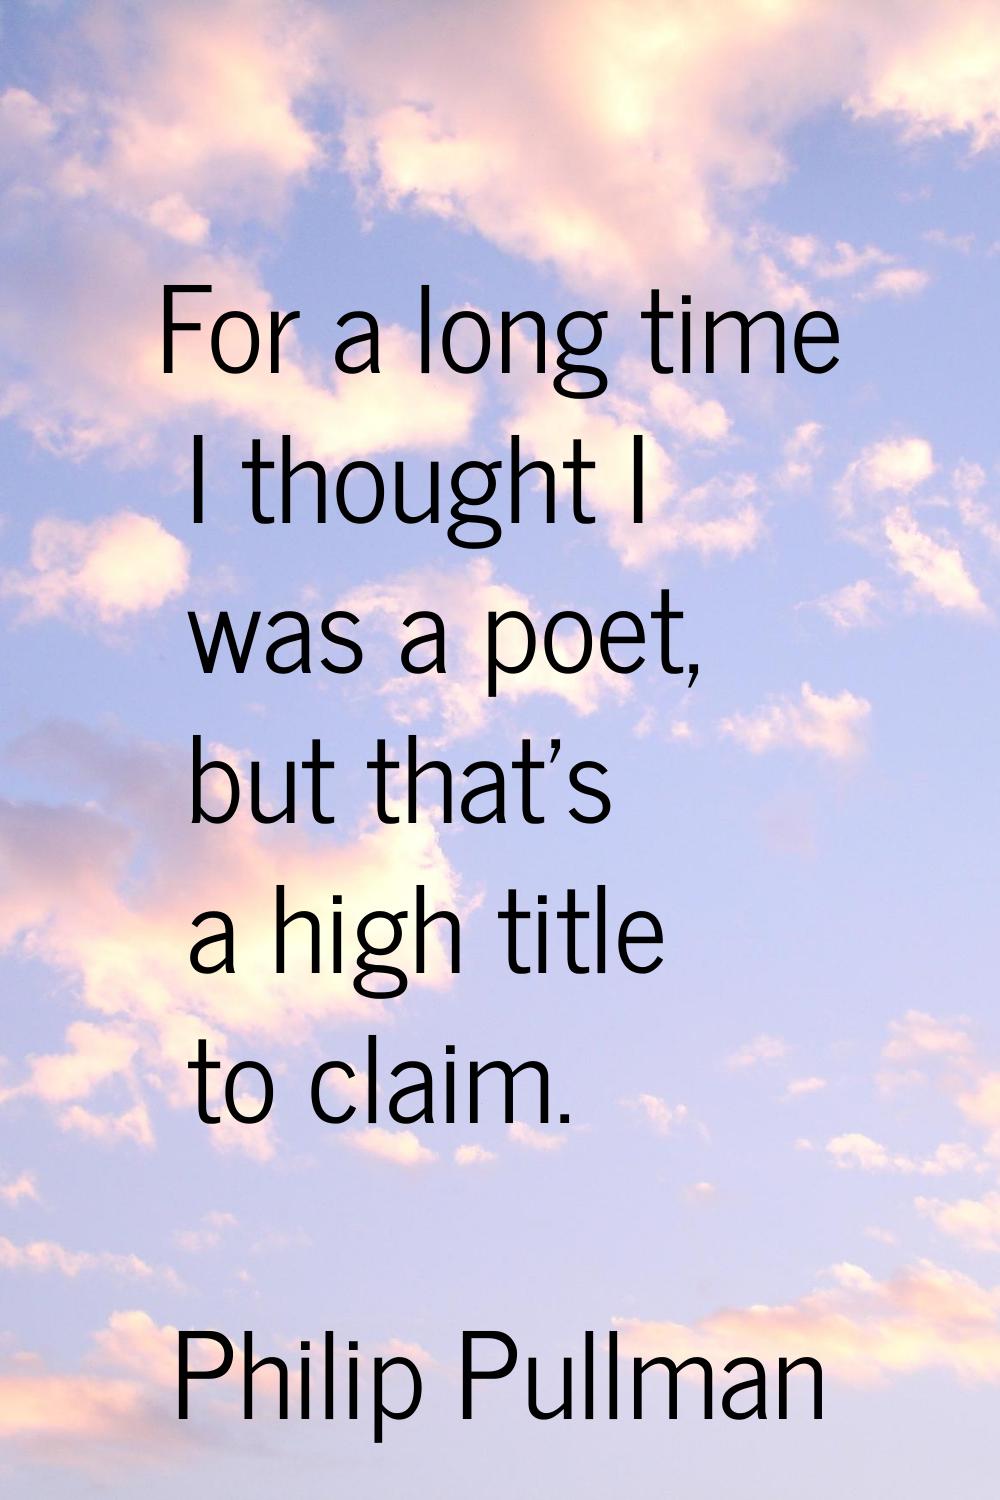 For a long time I thought I was a poet, but that's a high title to claim.